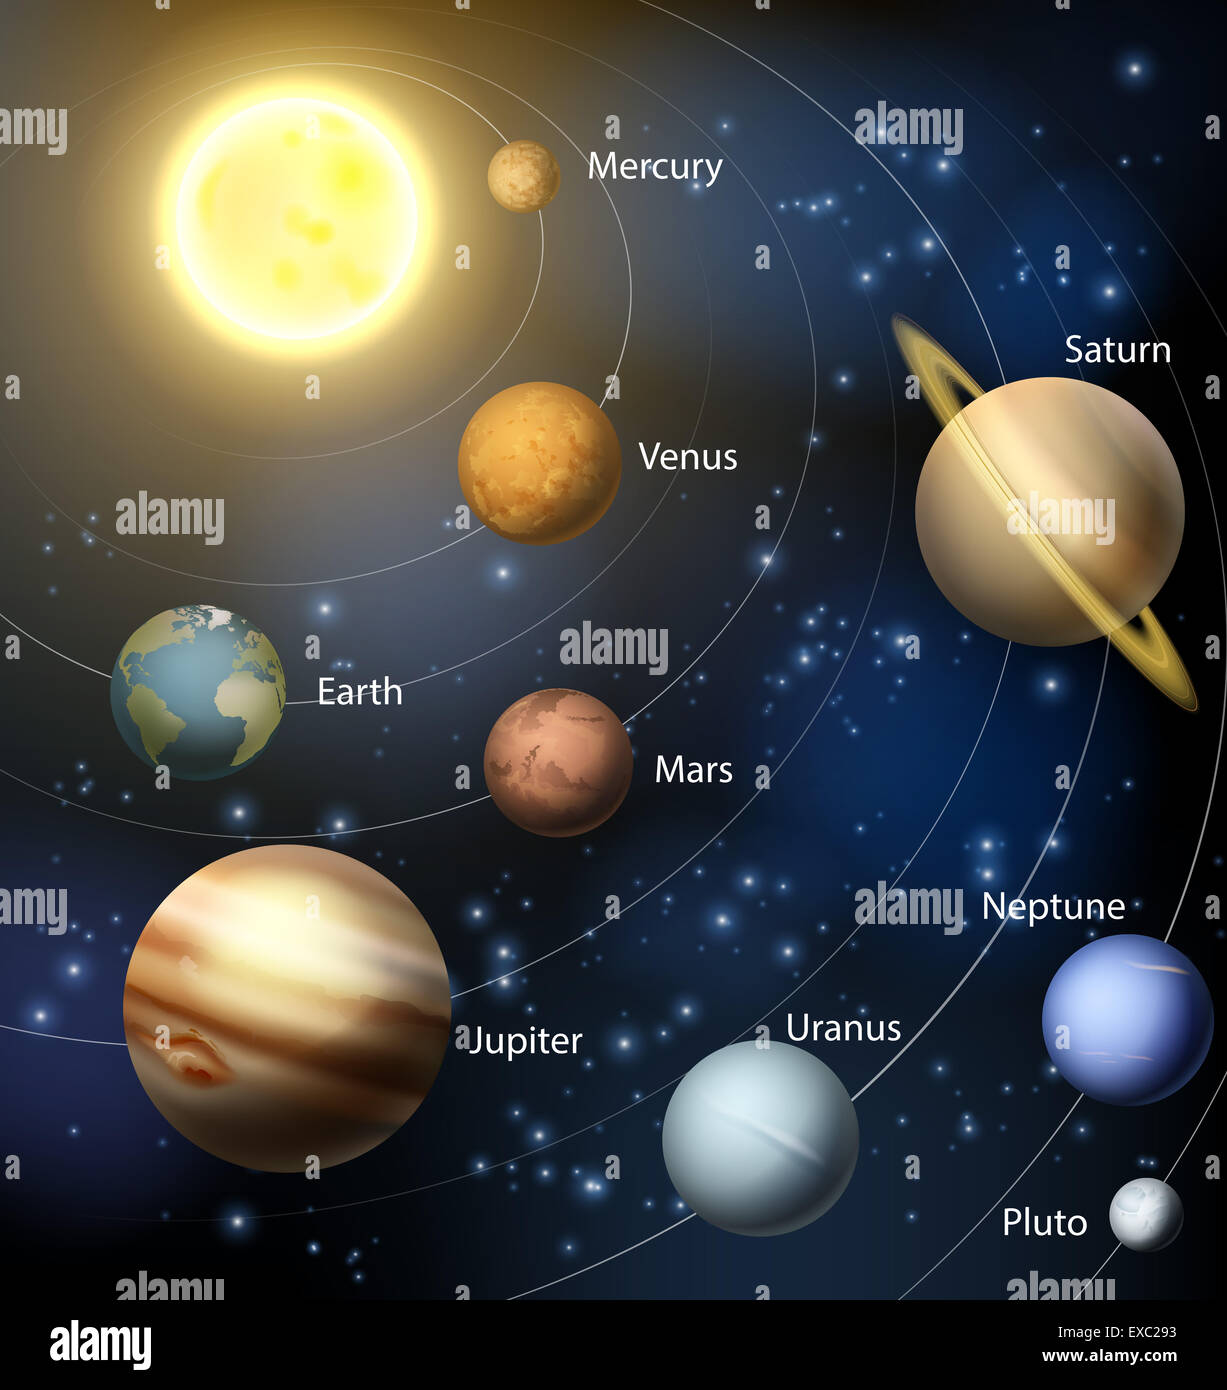 An illustration of the planets of our solar system with text name ...